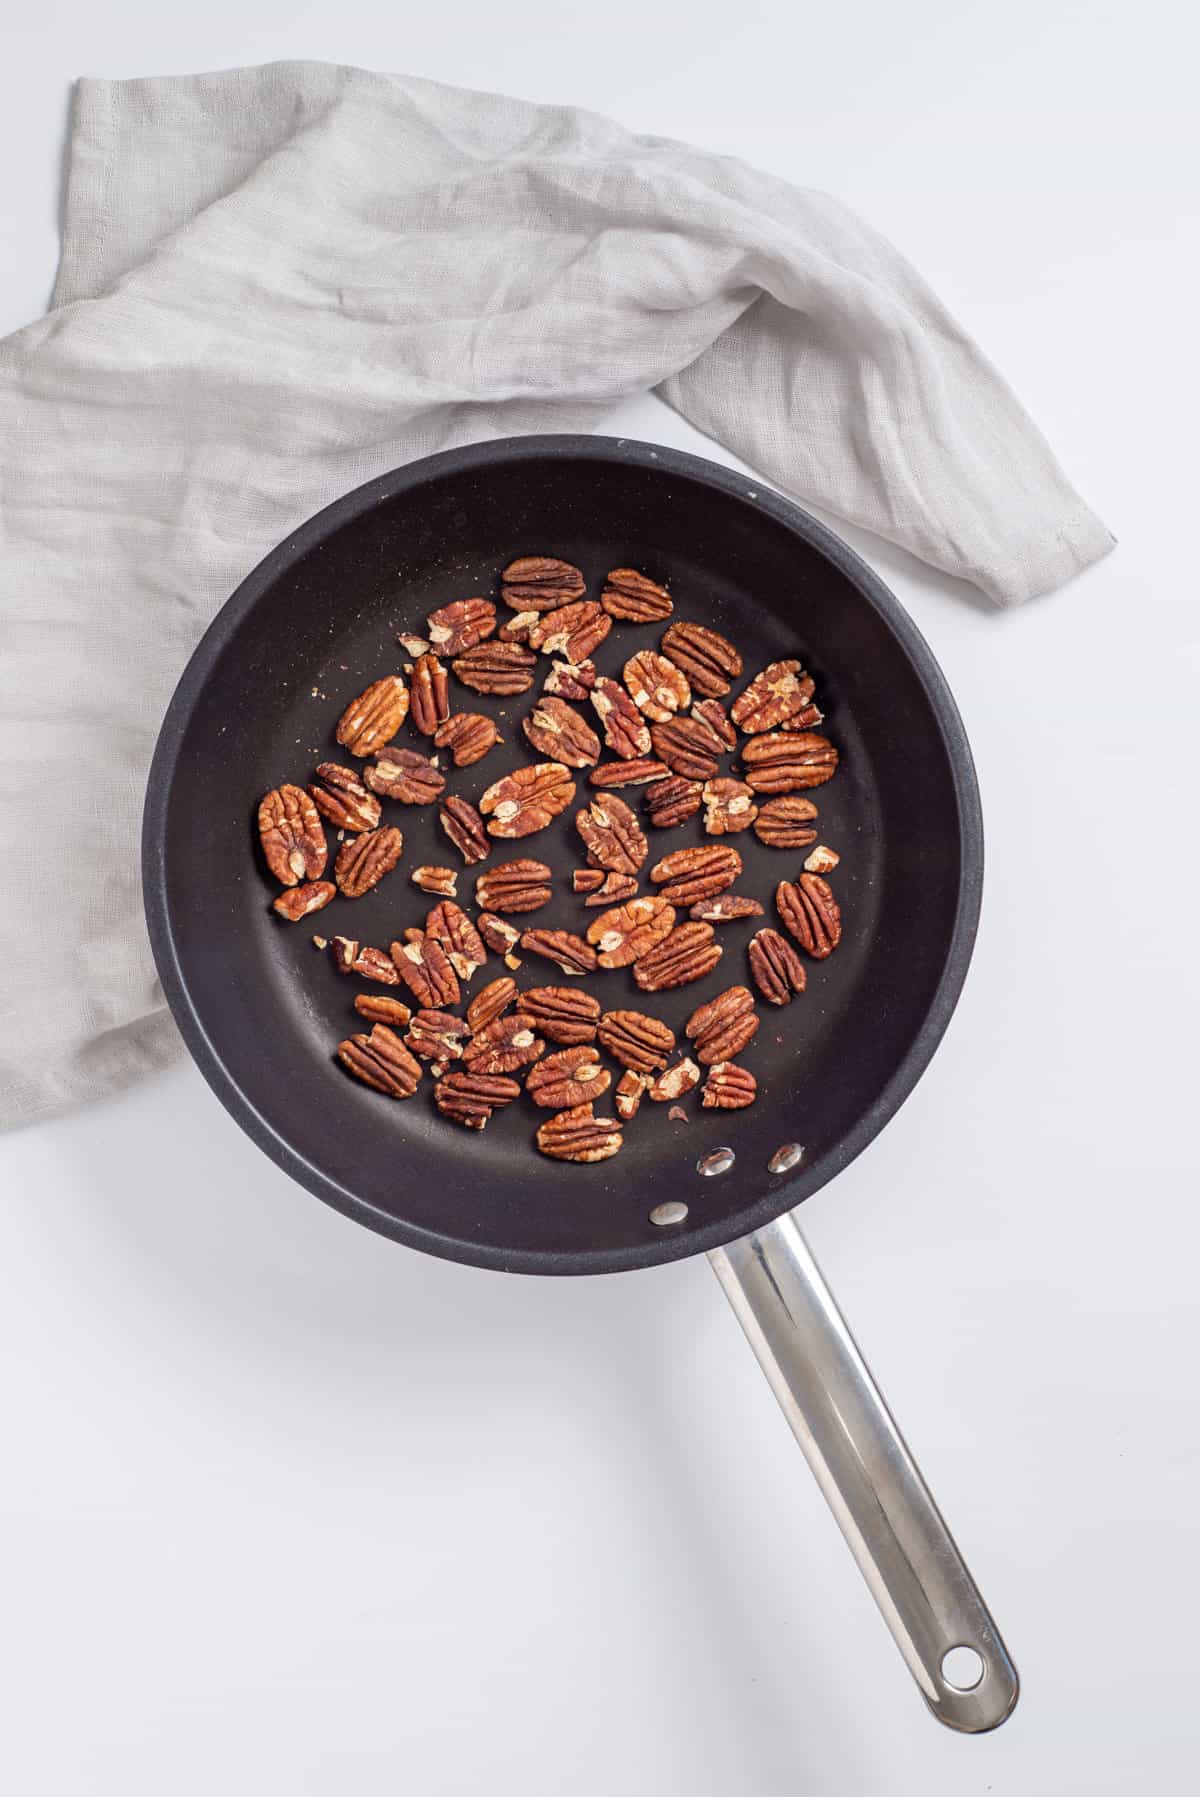 Overhead view of pecans being toasted in a large skillet.